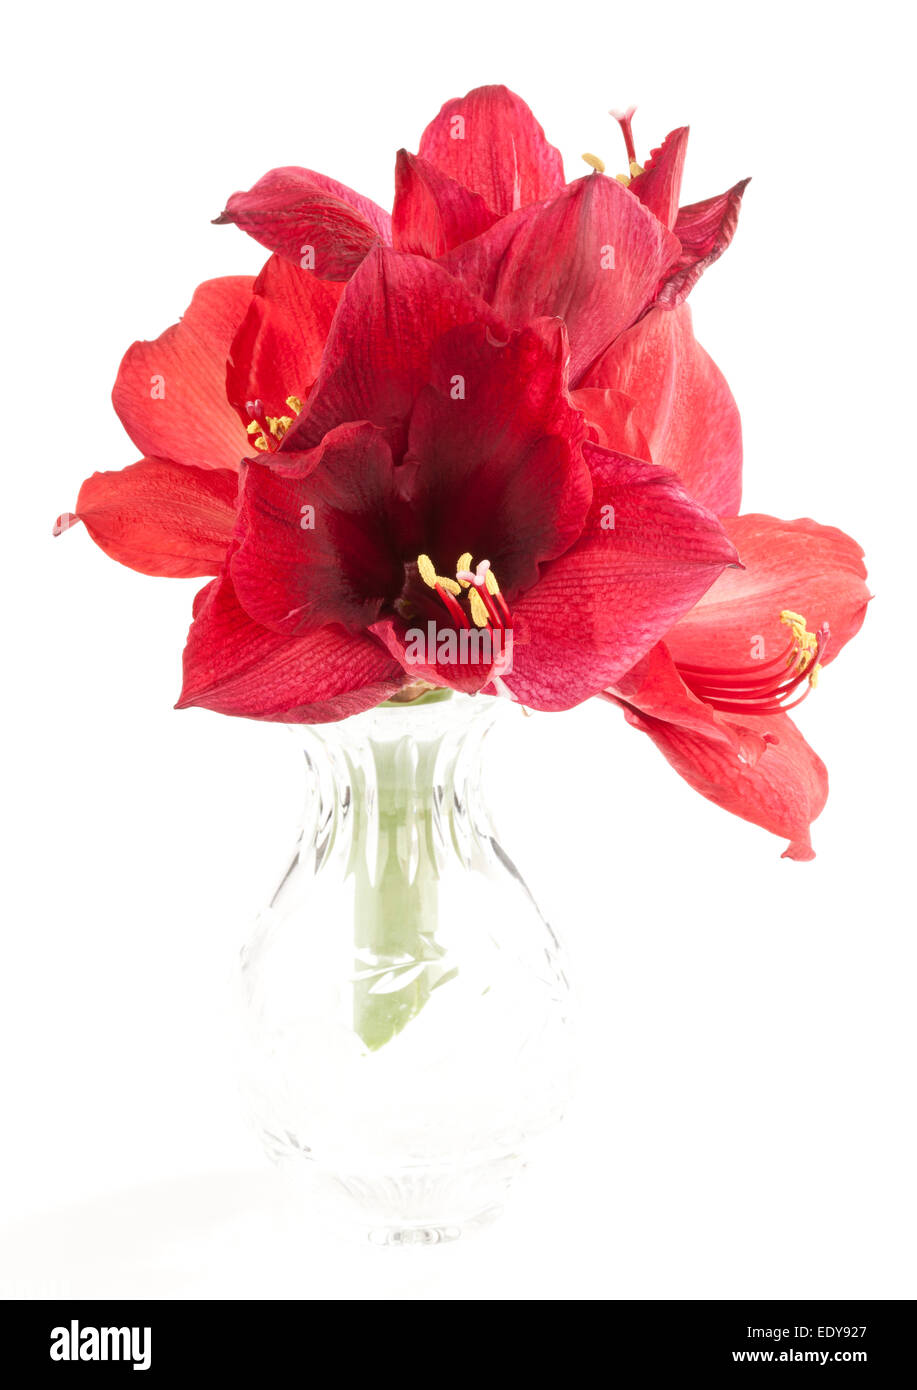 Four Amaryllis flowers in a glass vase Stock Photo